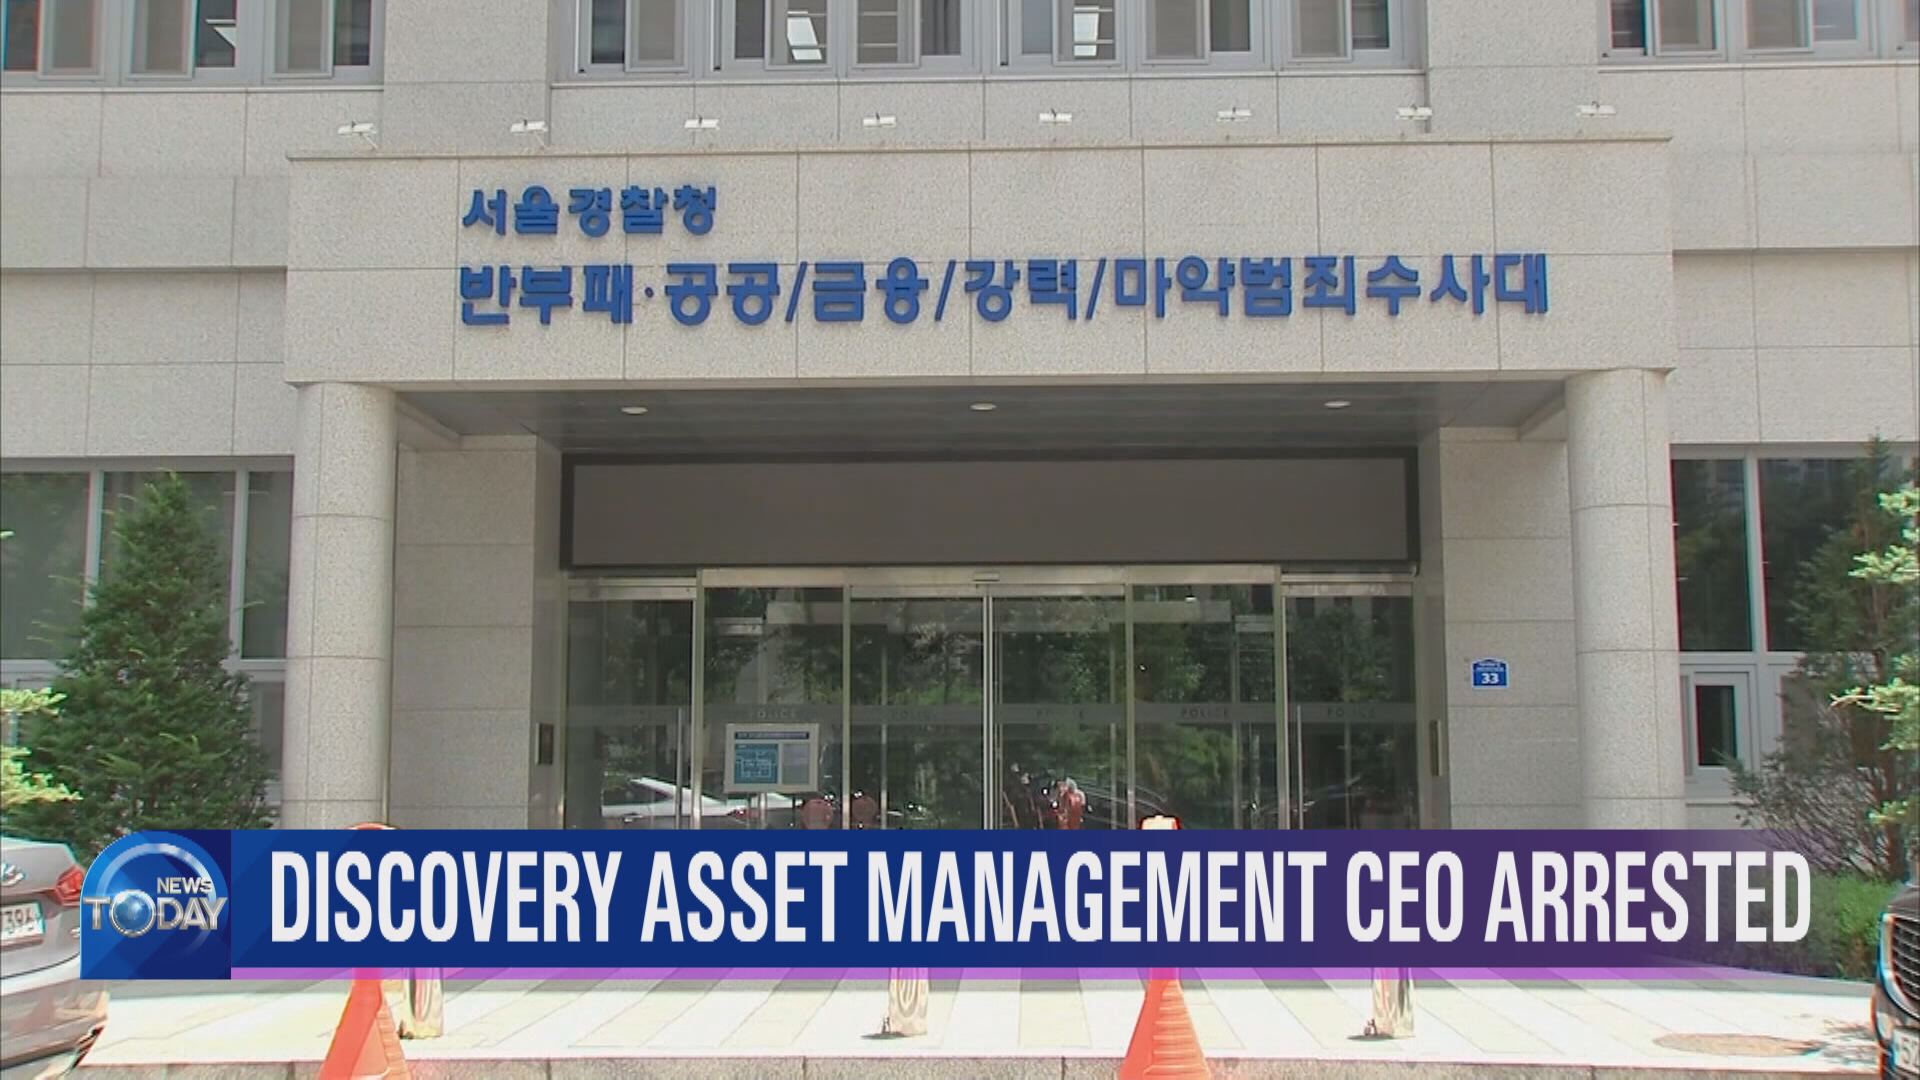 DISCOVERY ASSET MANAGEMENT CEO ARRESTED